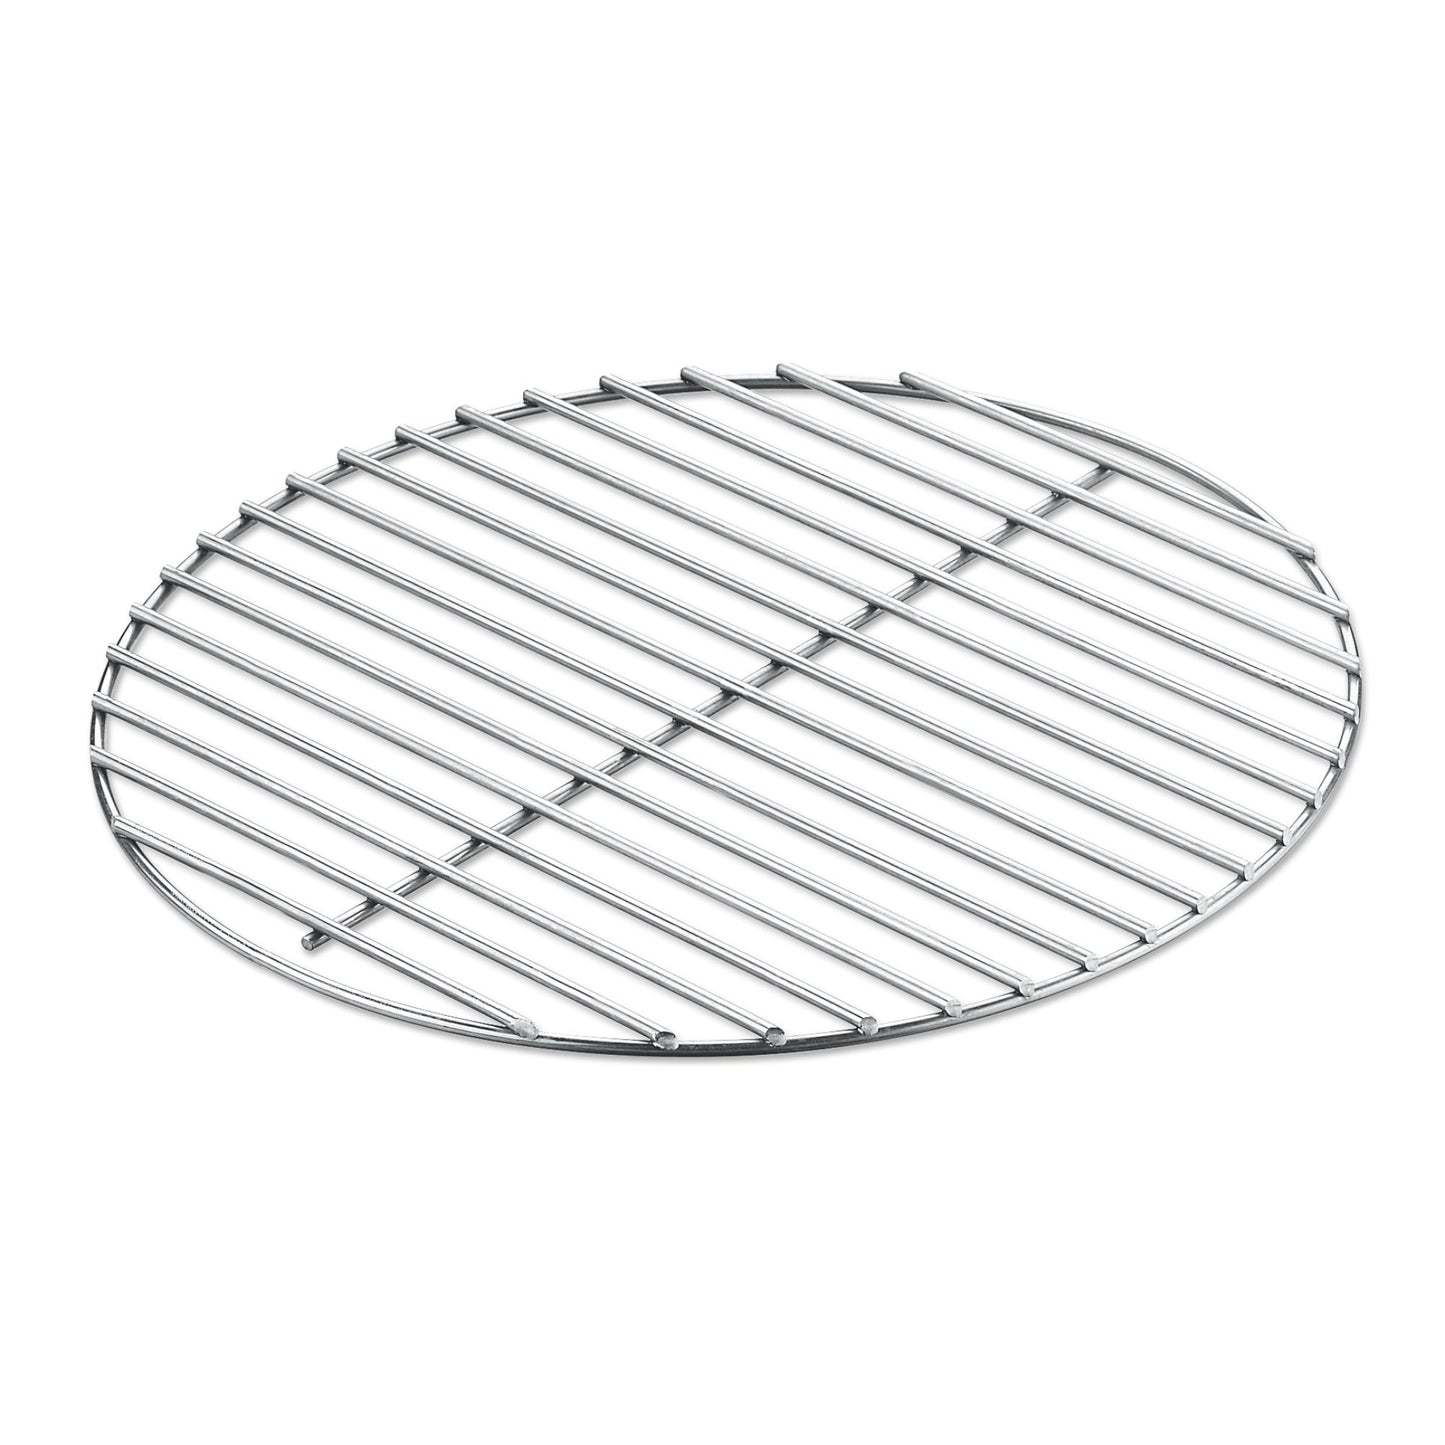 Weber Charcoal Grate for 18" Charcoal Grills